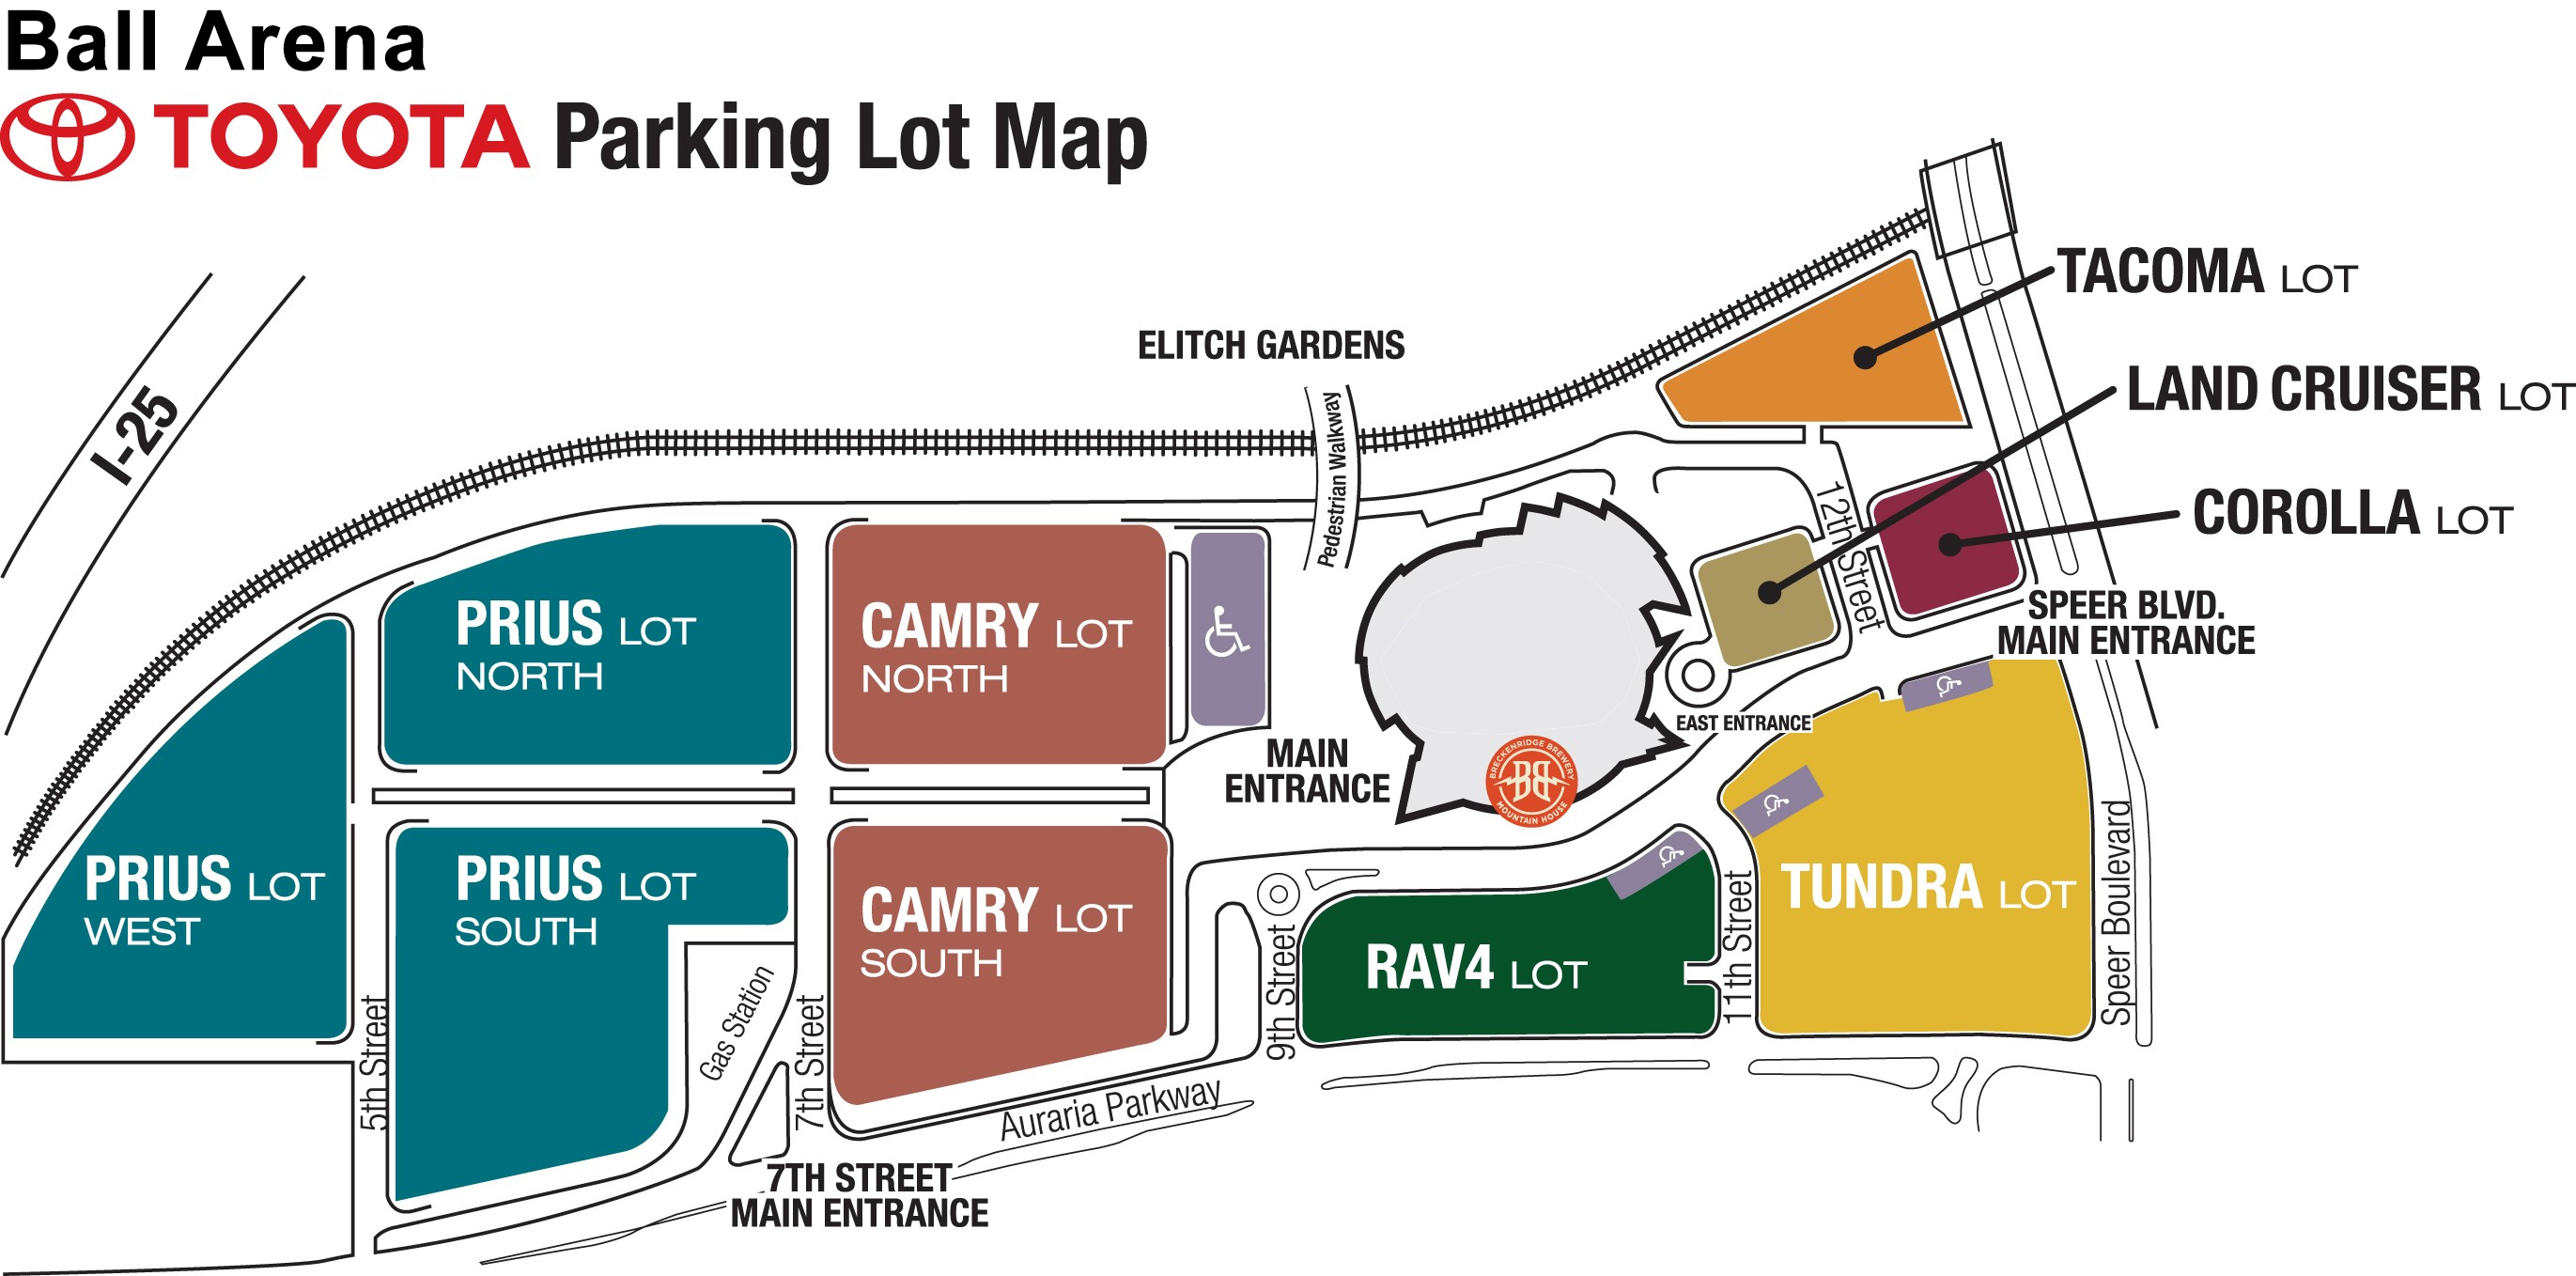 Parking/Directions | Meetings And Events